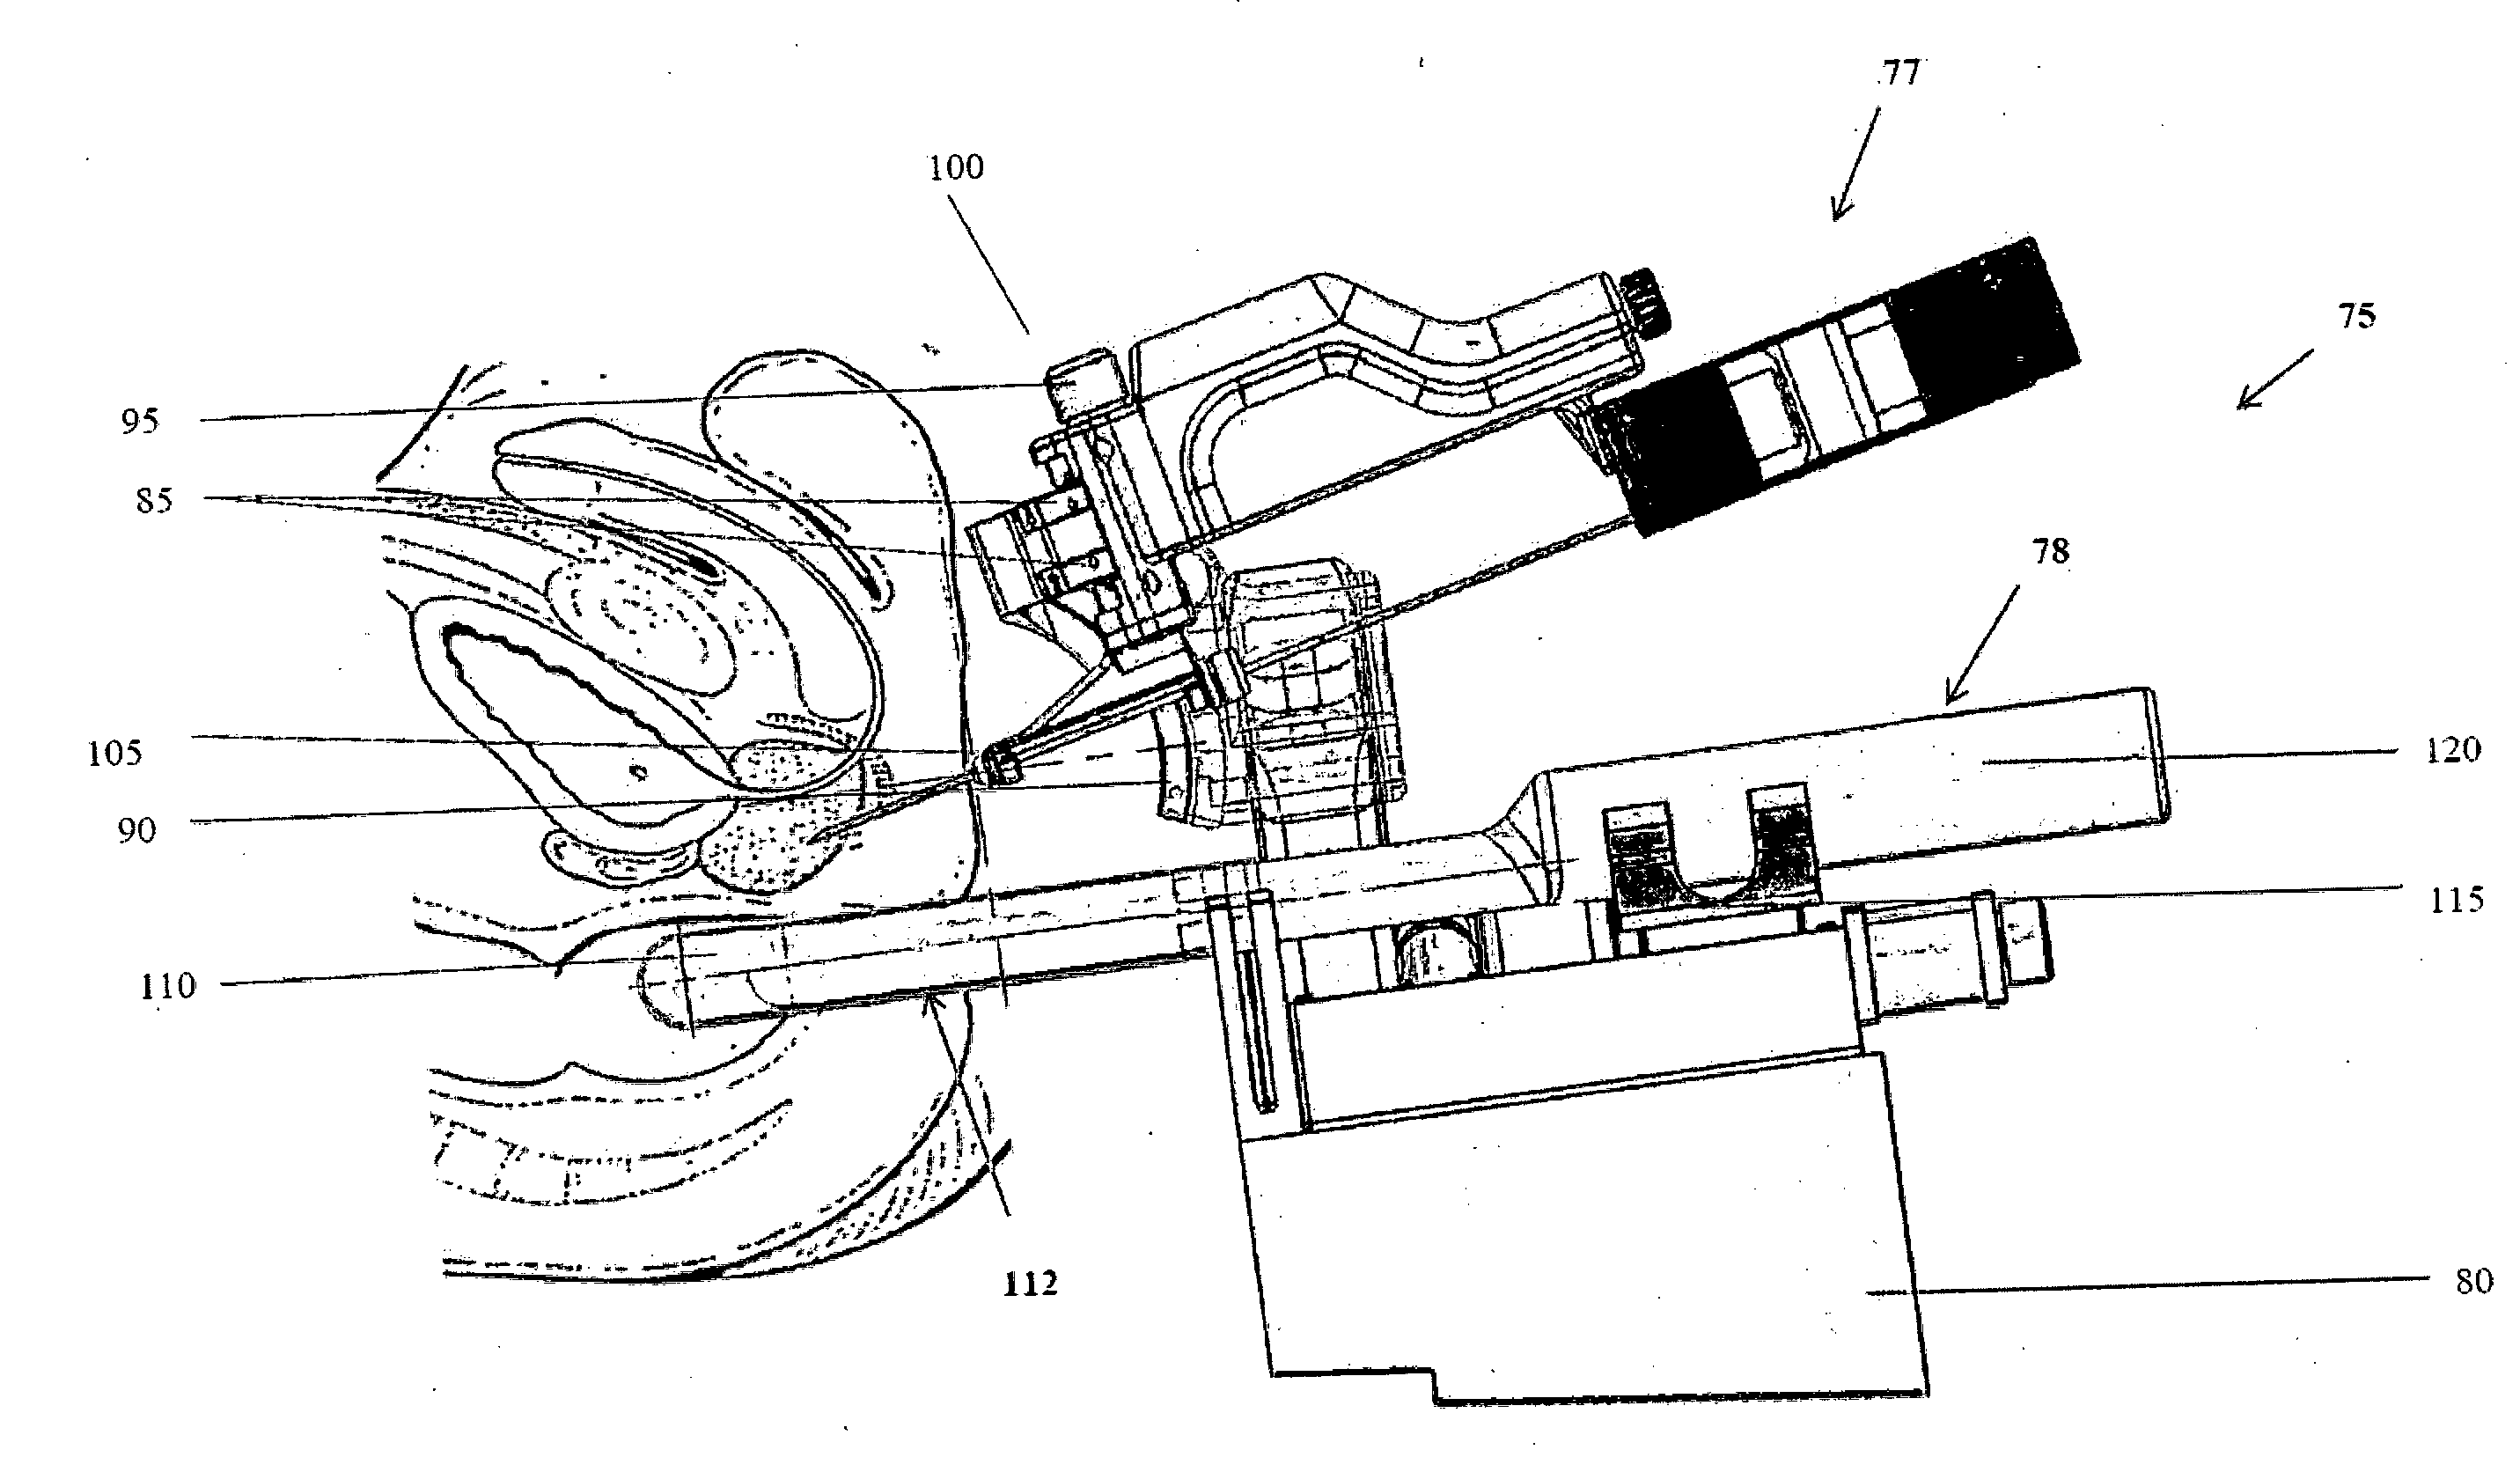 An apparatus and method for biopsy and therapy